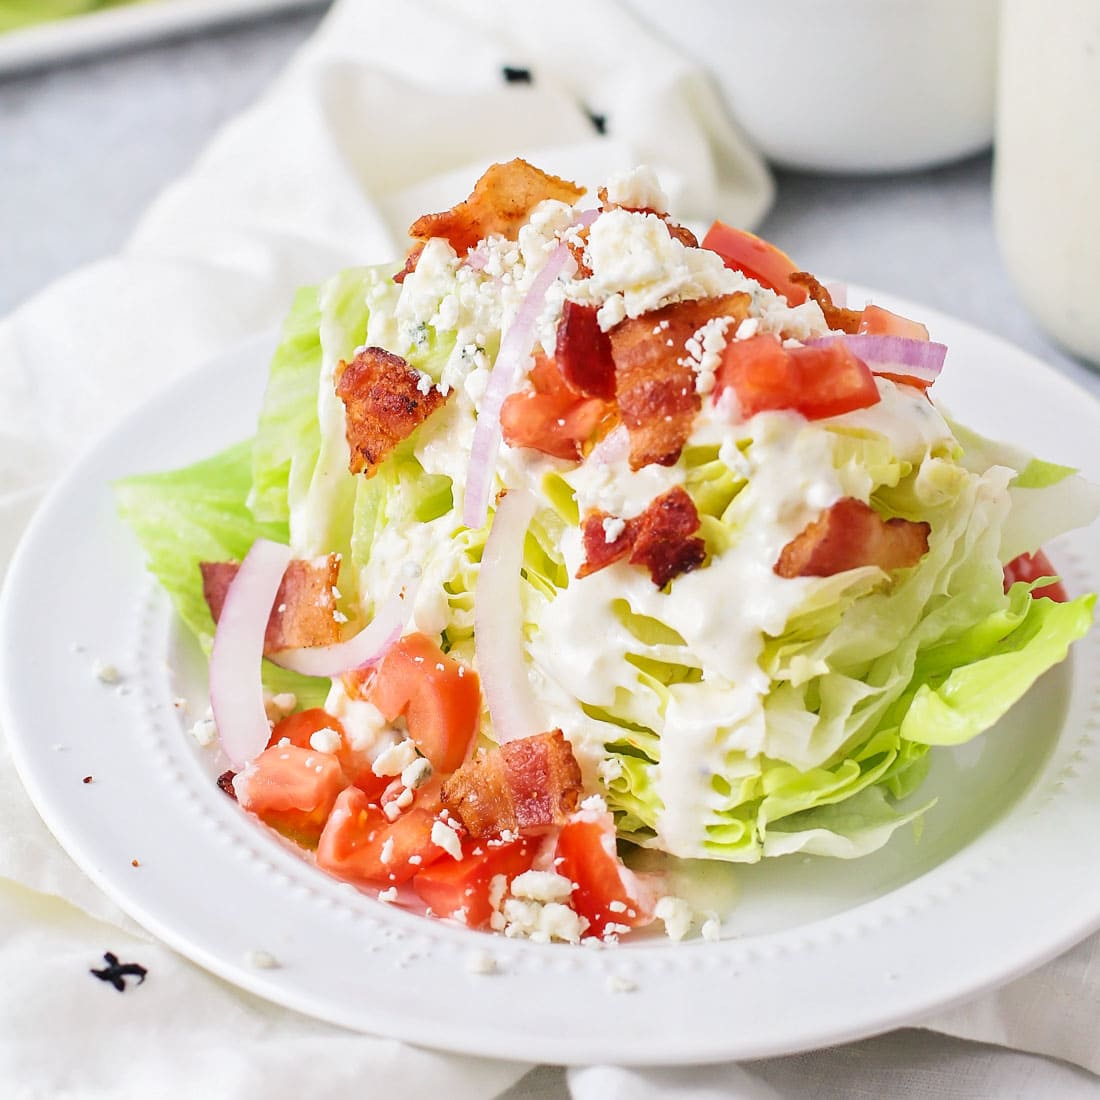 Father's Day Recipes - A wedge salad topped with bacon and bleu cheese crumbles.